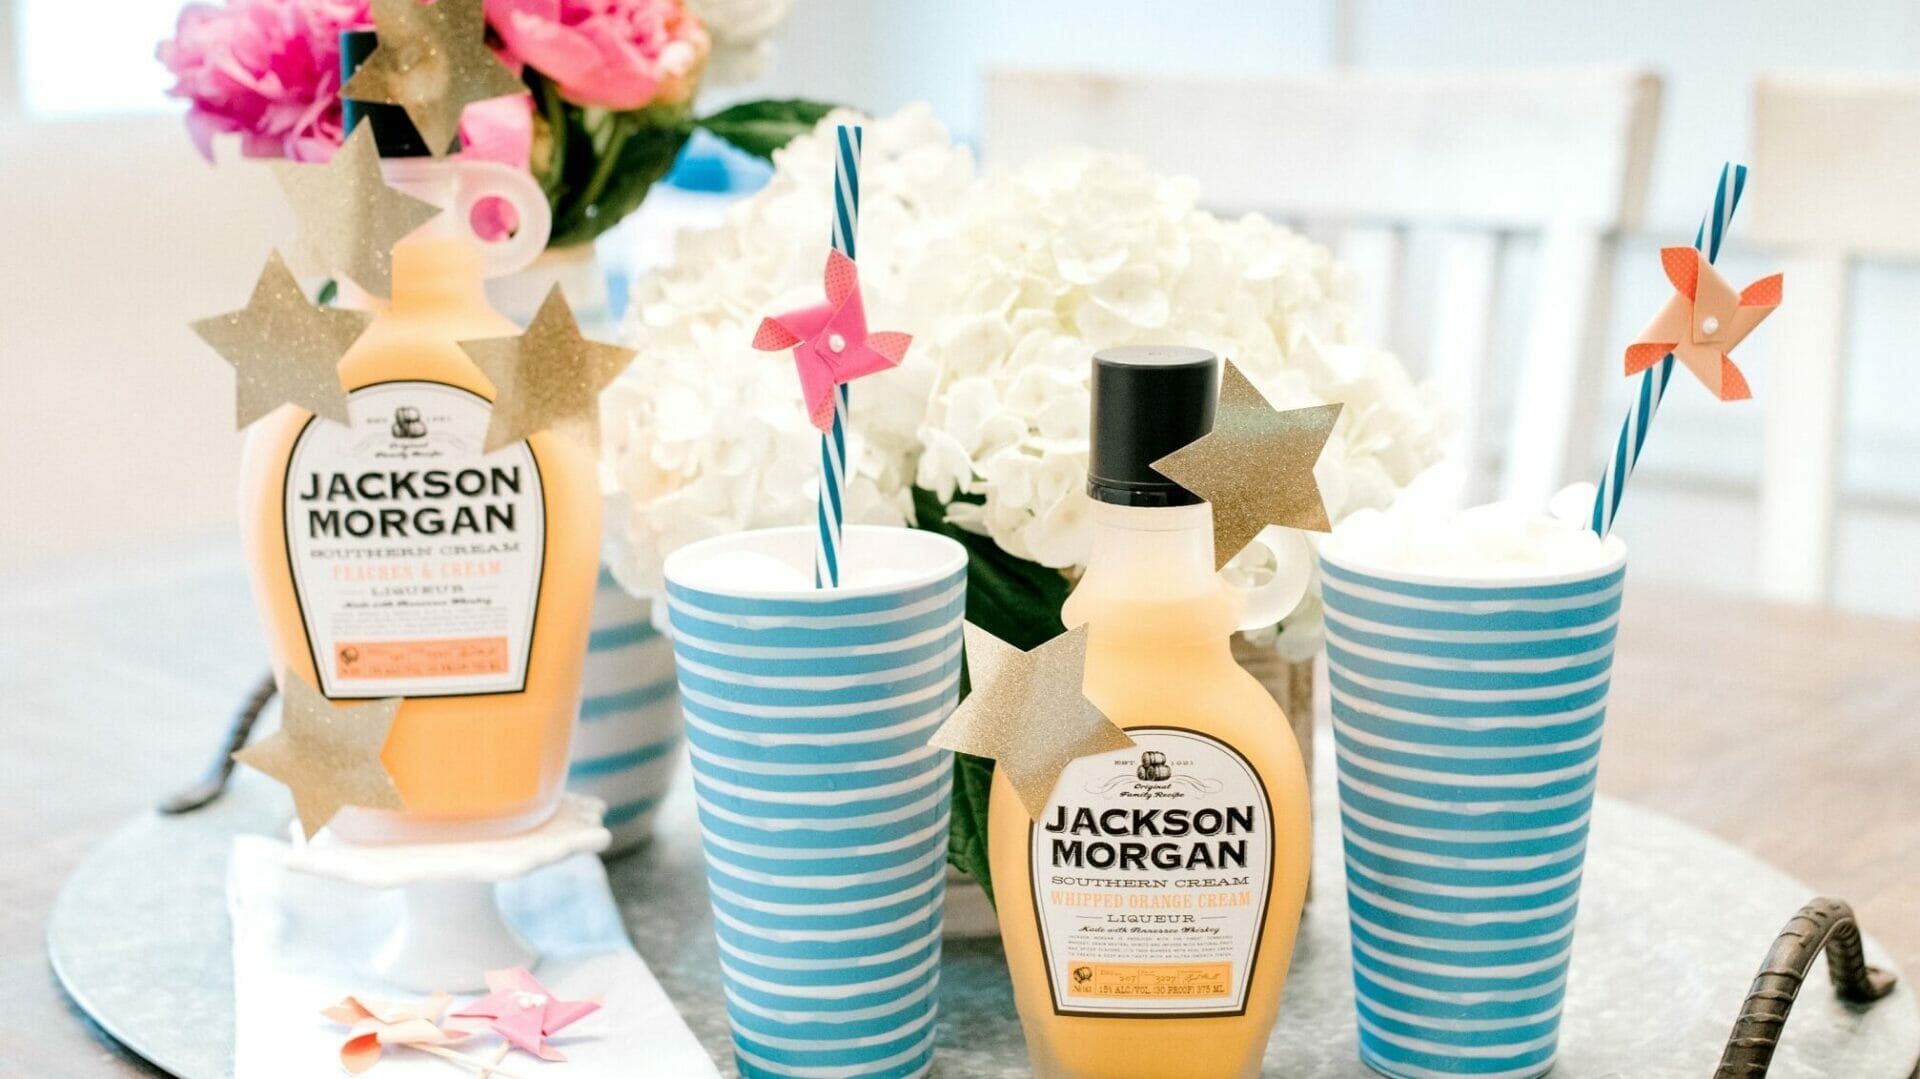 Bottle of Jackson Morgan Southern Cream with striped cups and straws.